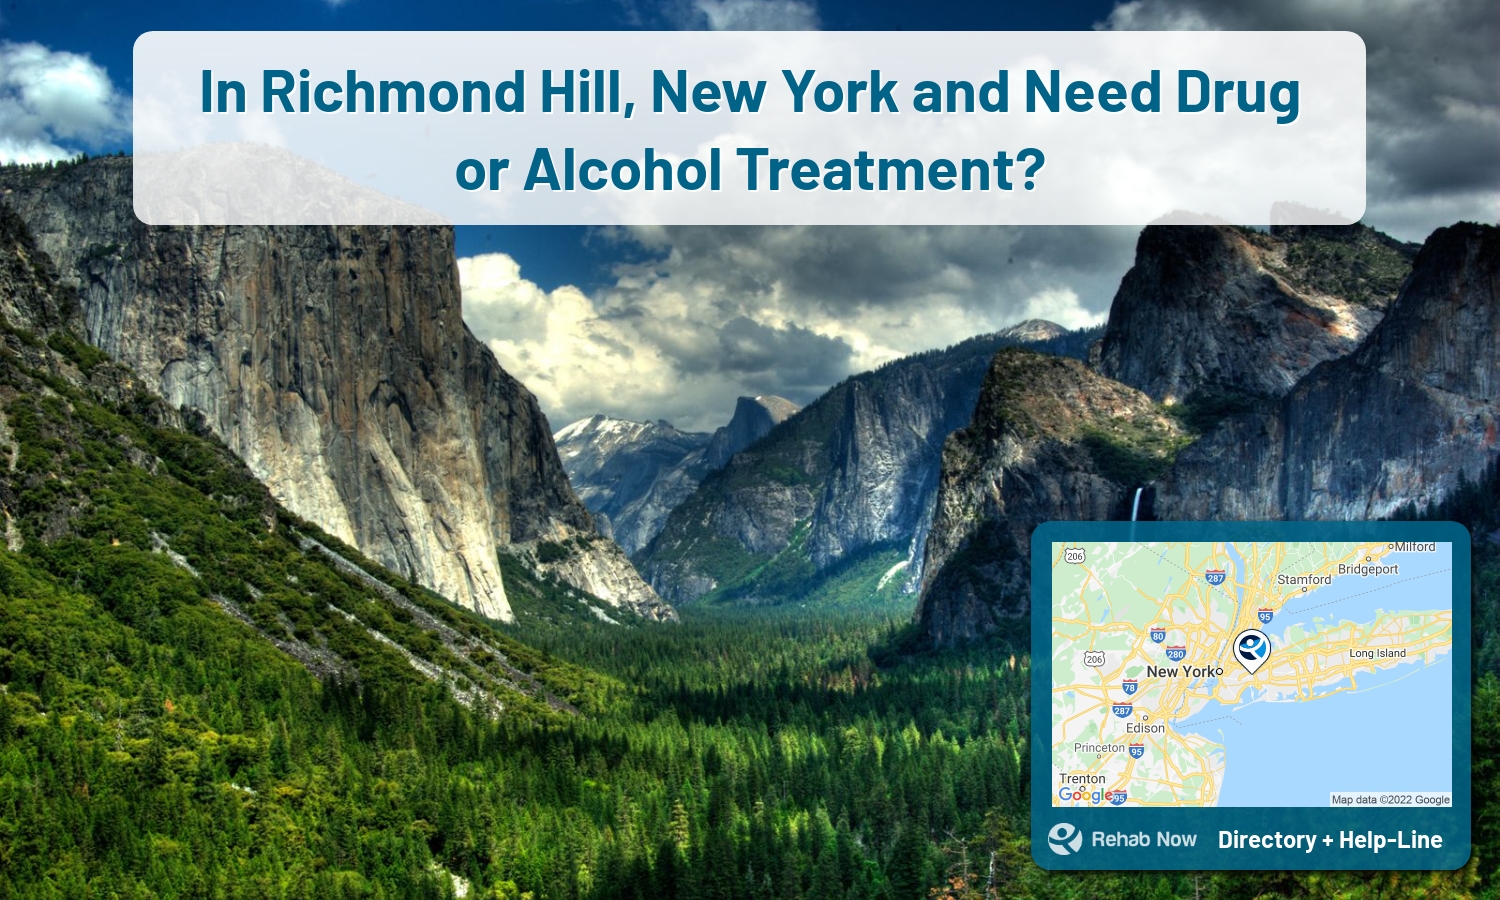 Richmond Hill, NY Treatment Centers. Find drug rehab in Richmond Hill, New York, or detox and treatment programs. Get the right help now!